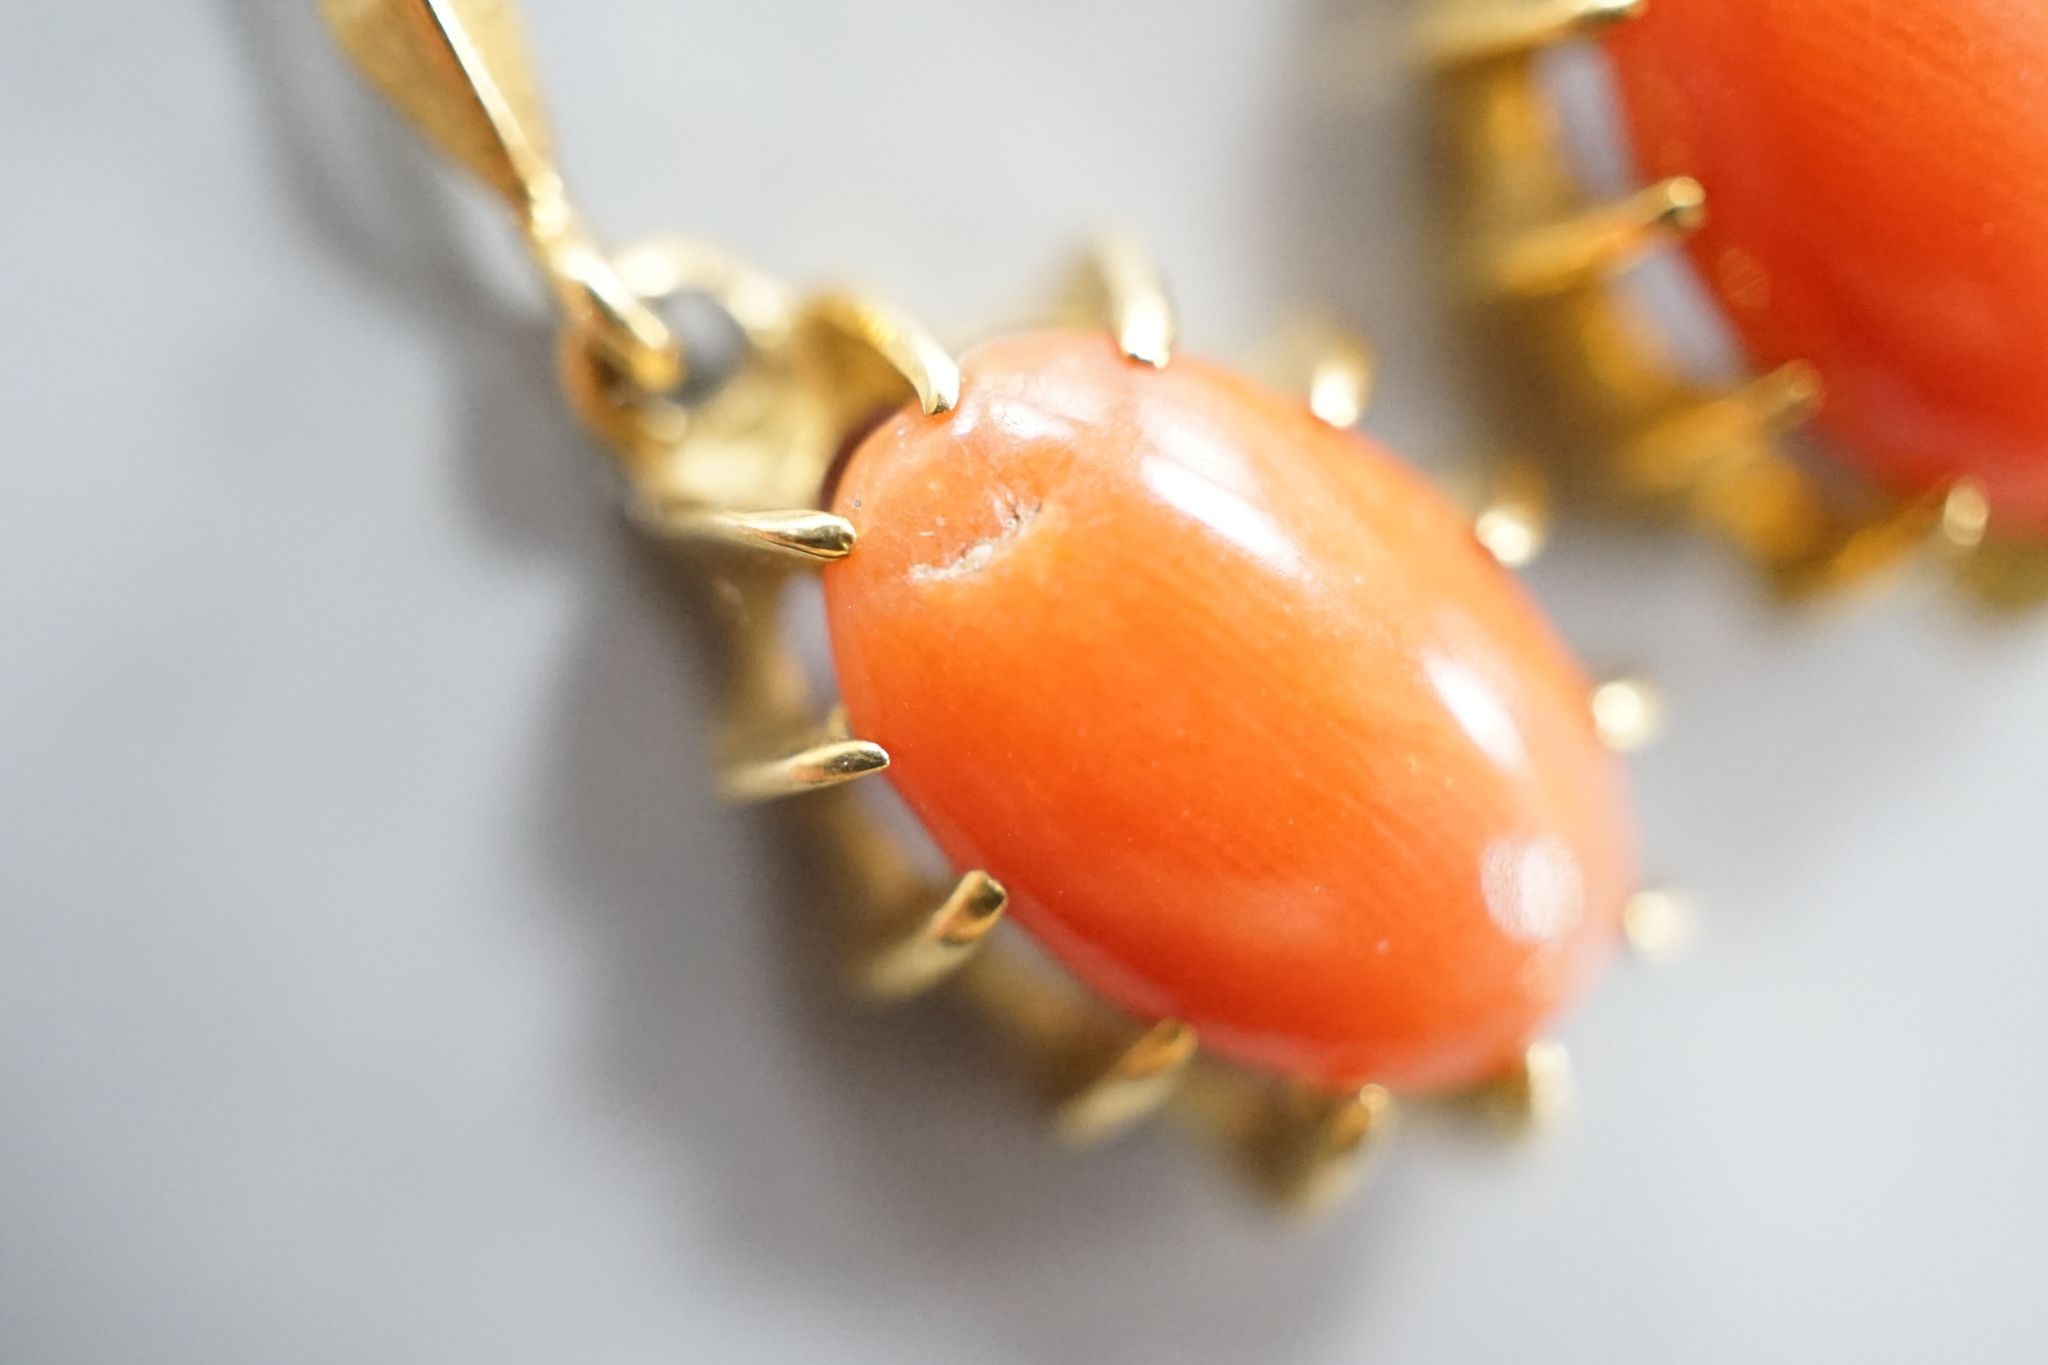 A pair of 18k and oval coral bead set drop earrings, 39mm, gross weight 6.8 grams.